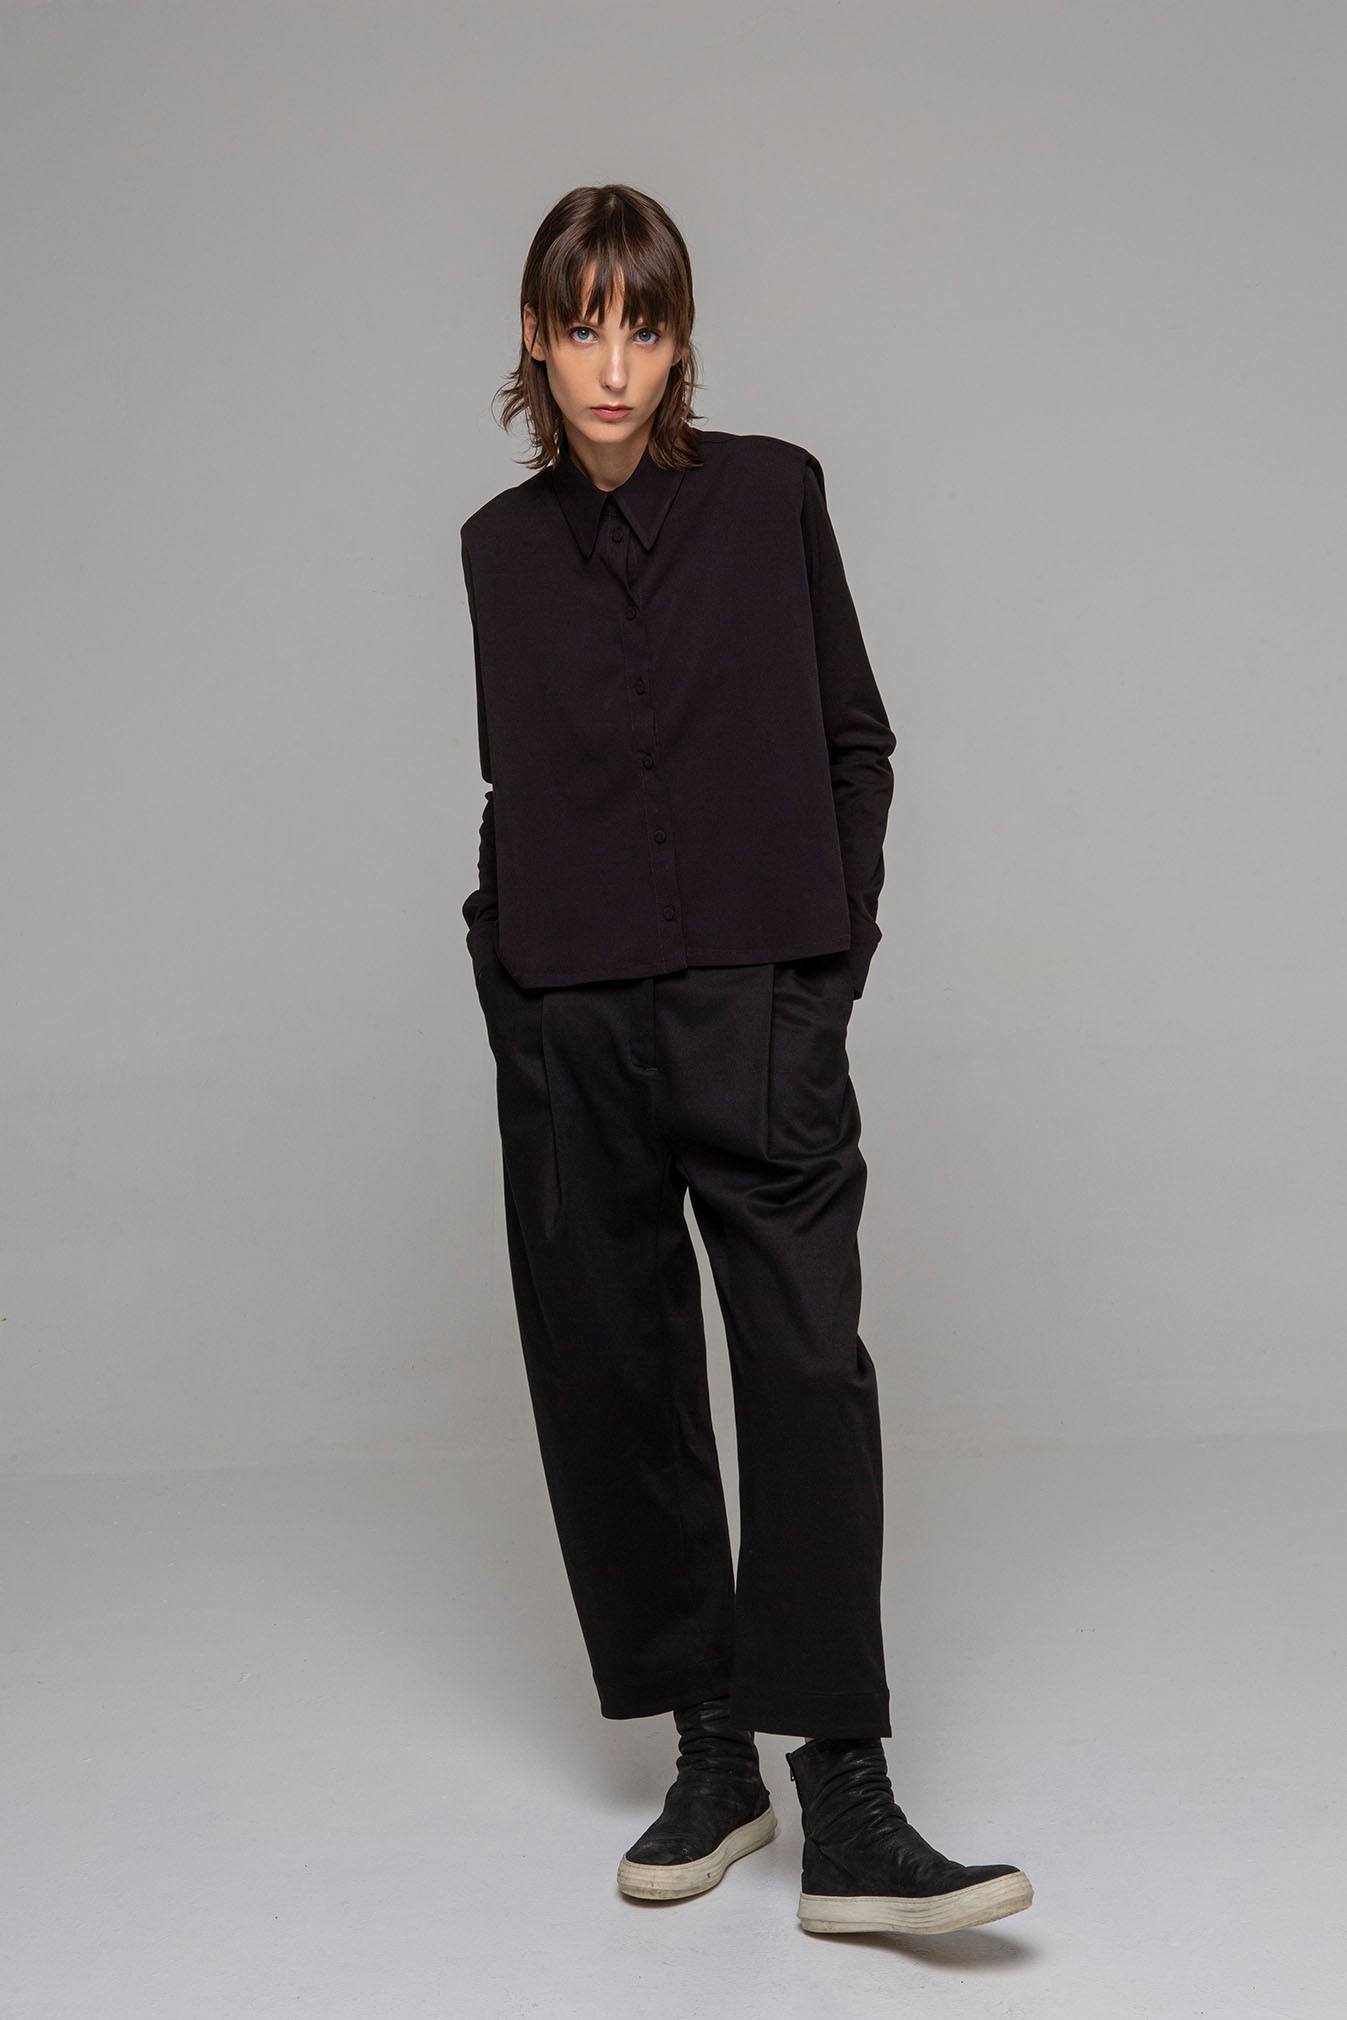 Women's Pleated Pegged Pants by Noble Athens